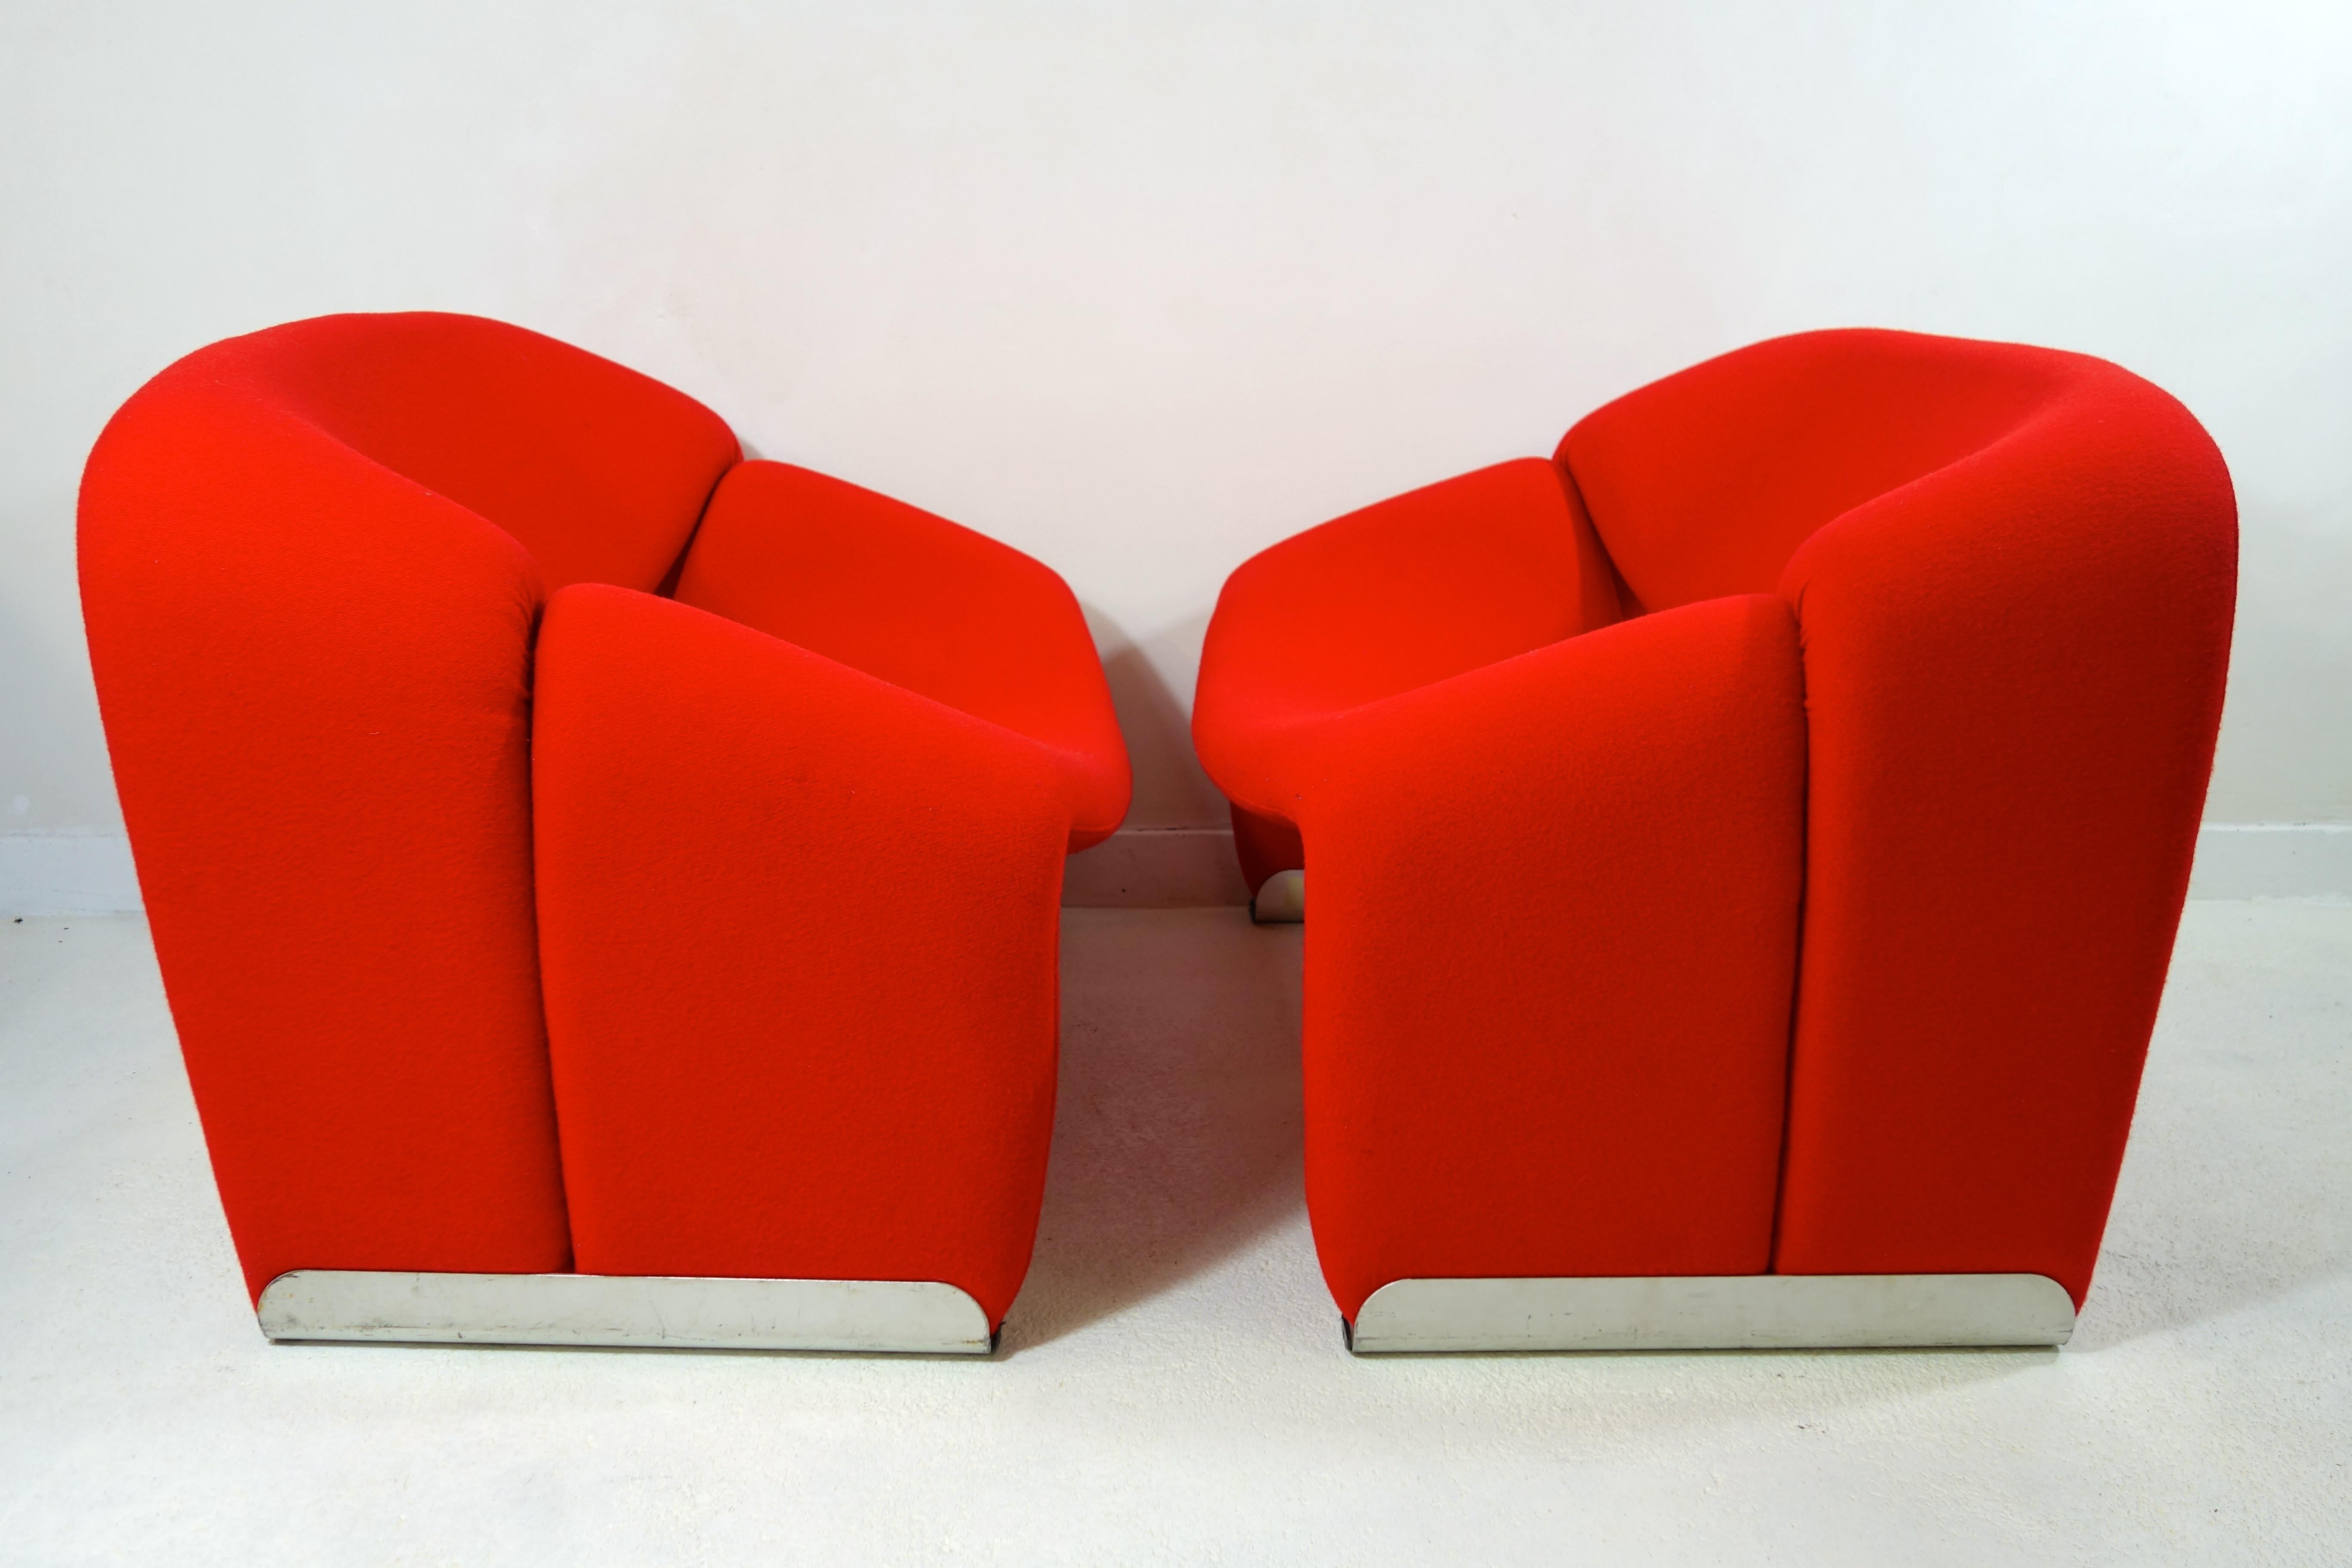 Mid-Century Modern Pair of Red Groovy Chairs F598 Silver Colored Feet by Pierre Paulin for Artifort